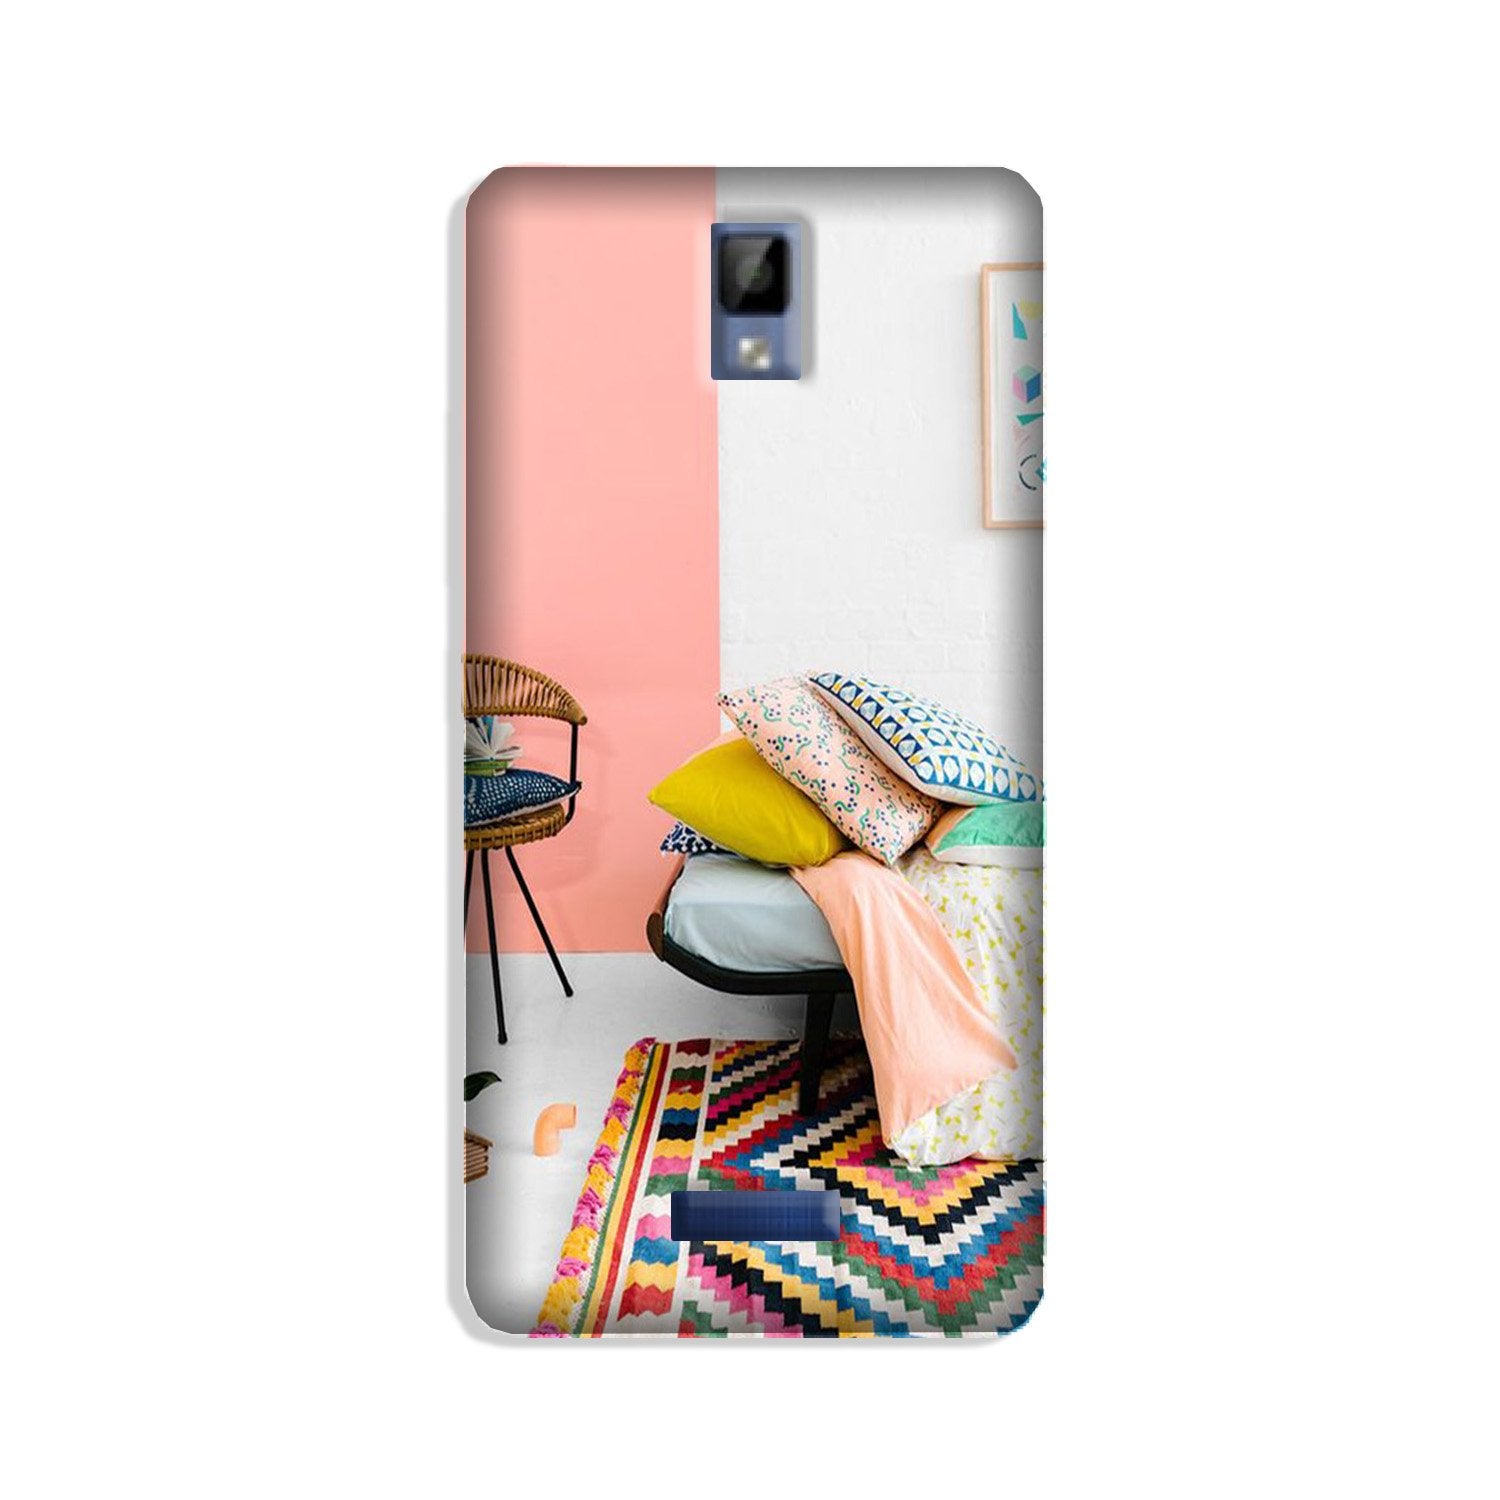 Home Décor Case for Gionee P7